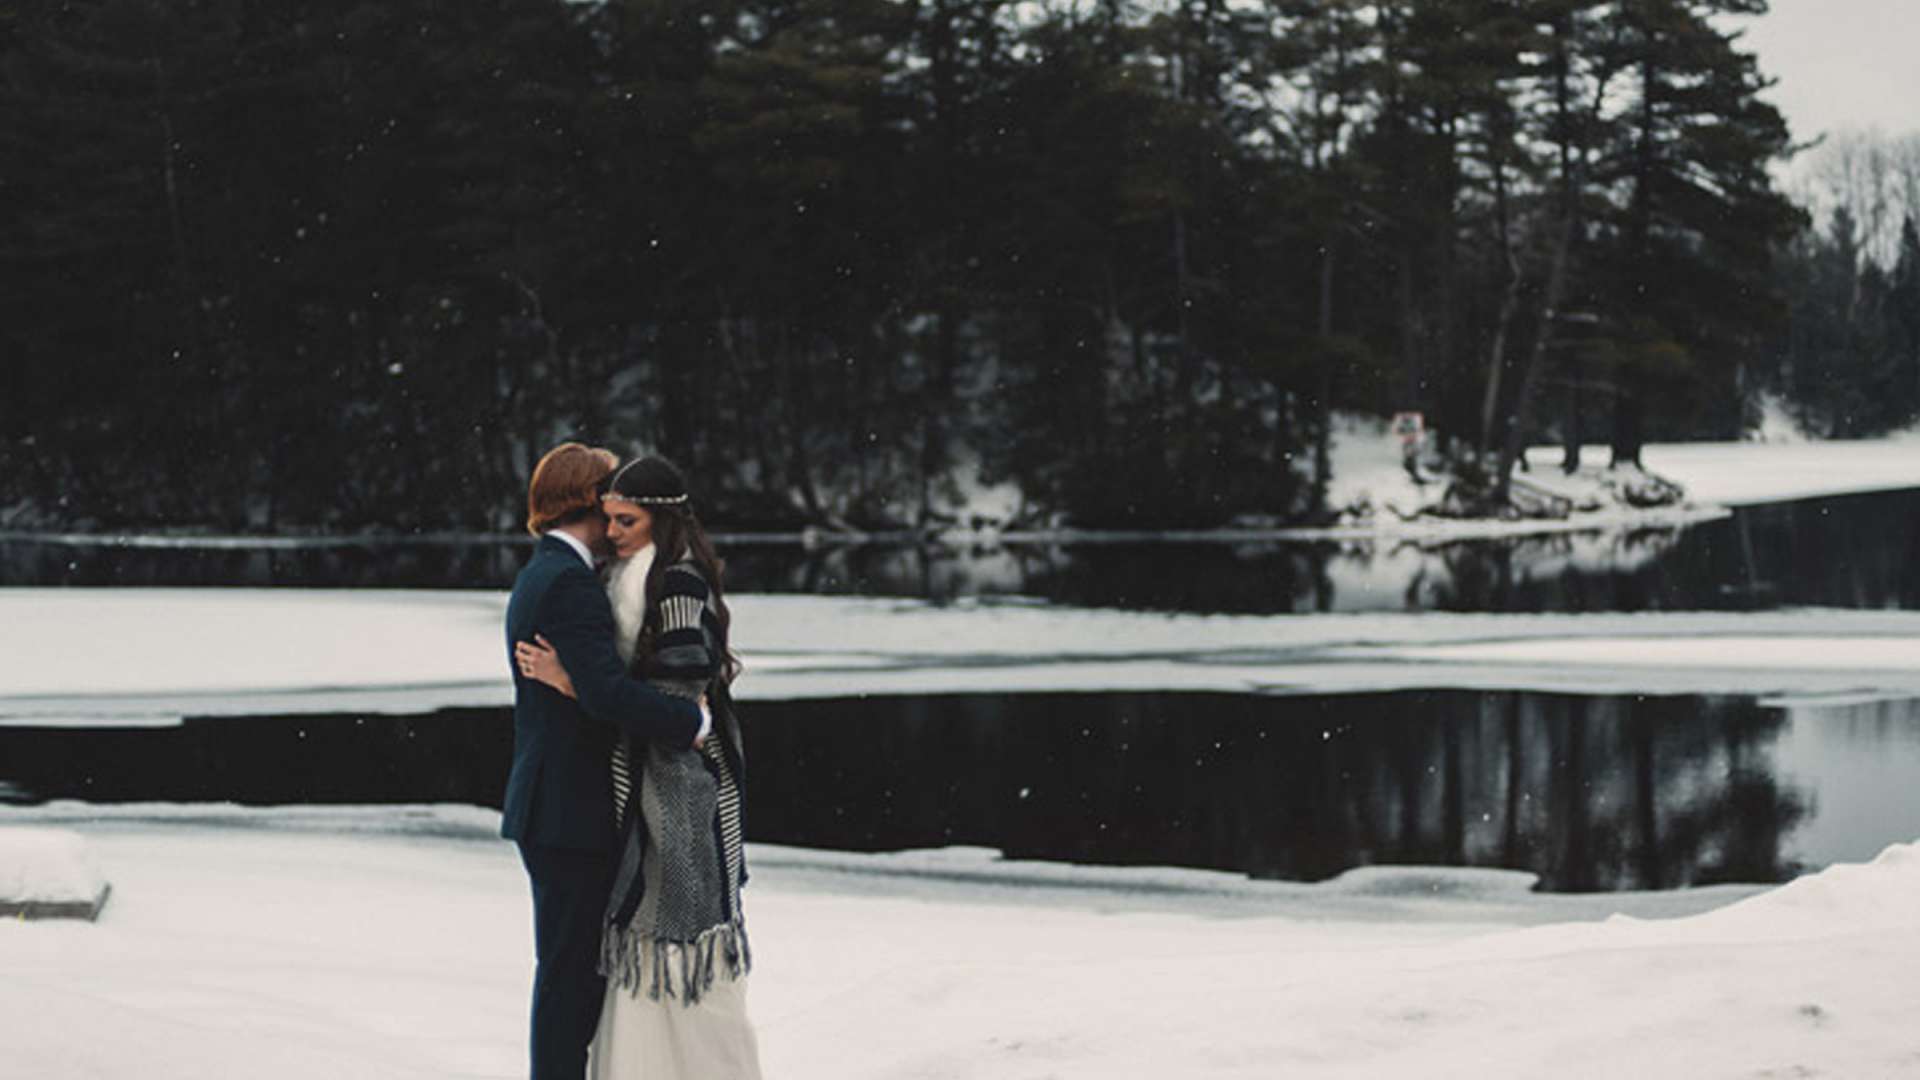 A Winter Wedding Worth Swooning Over